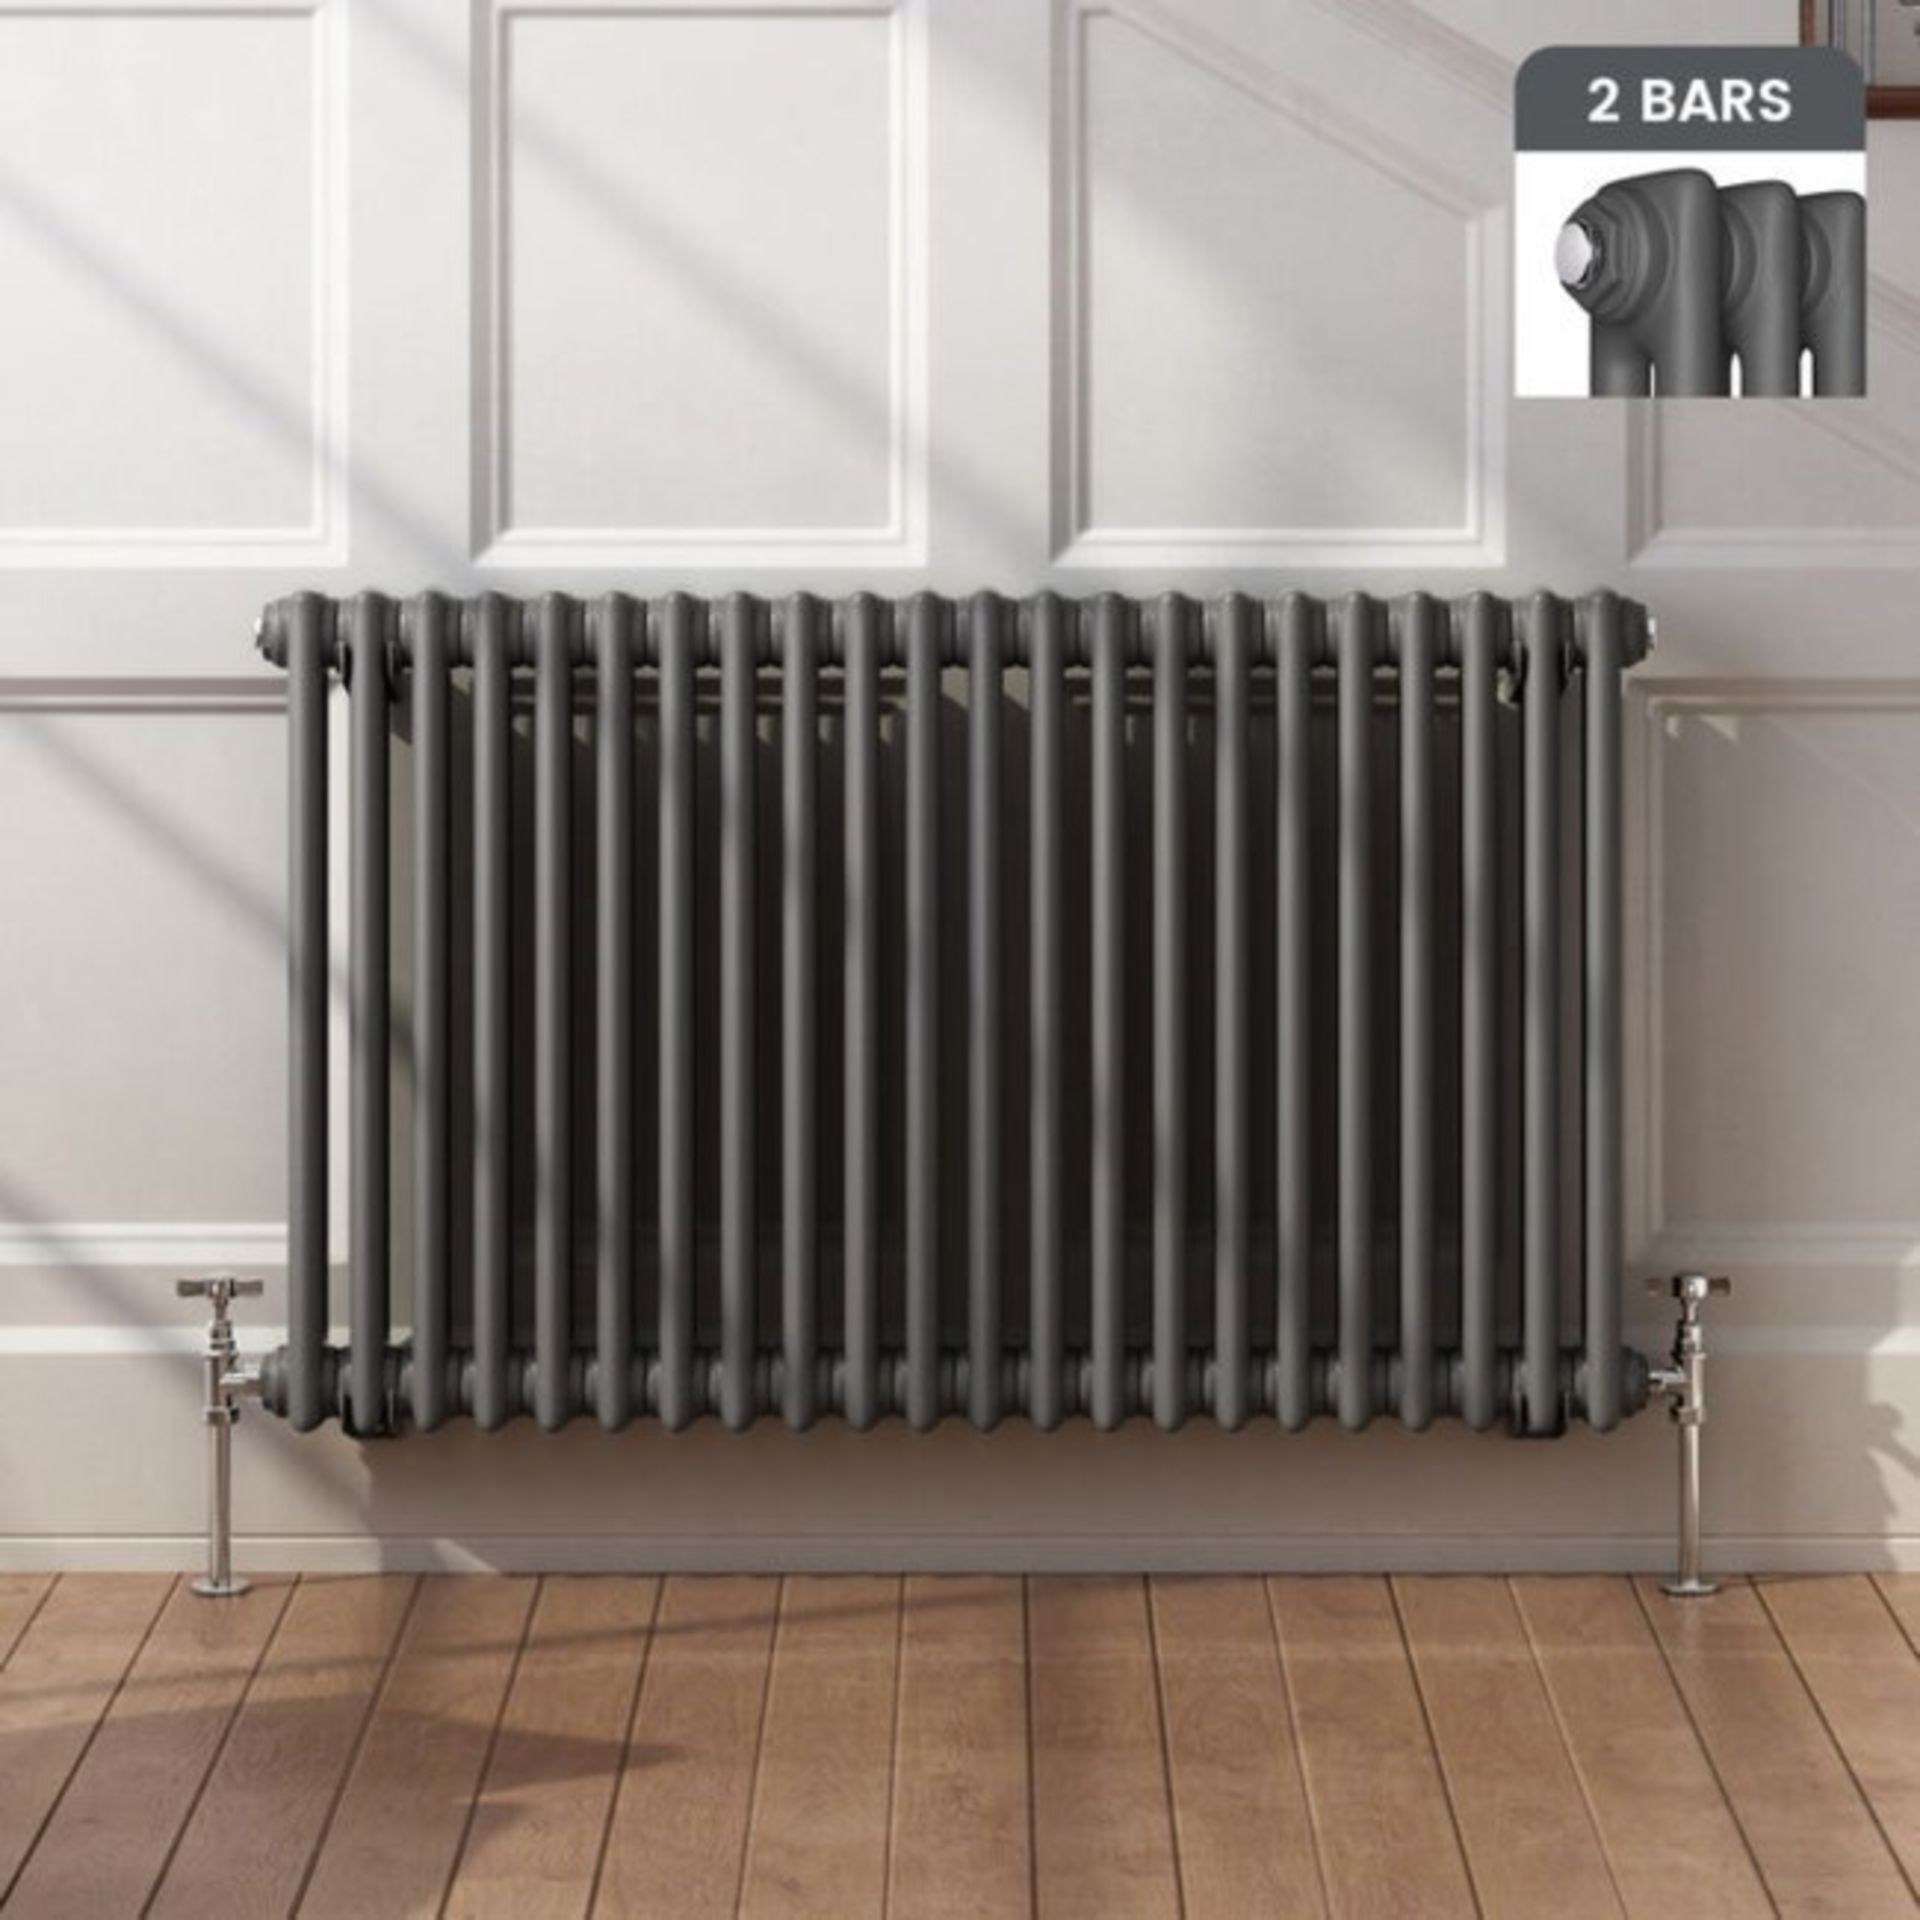 600x1008mm Anthracite Double Panel Horizontal Colosseum Traditional Radiator. RRP £549.9...